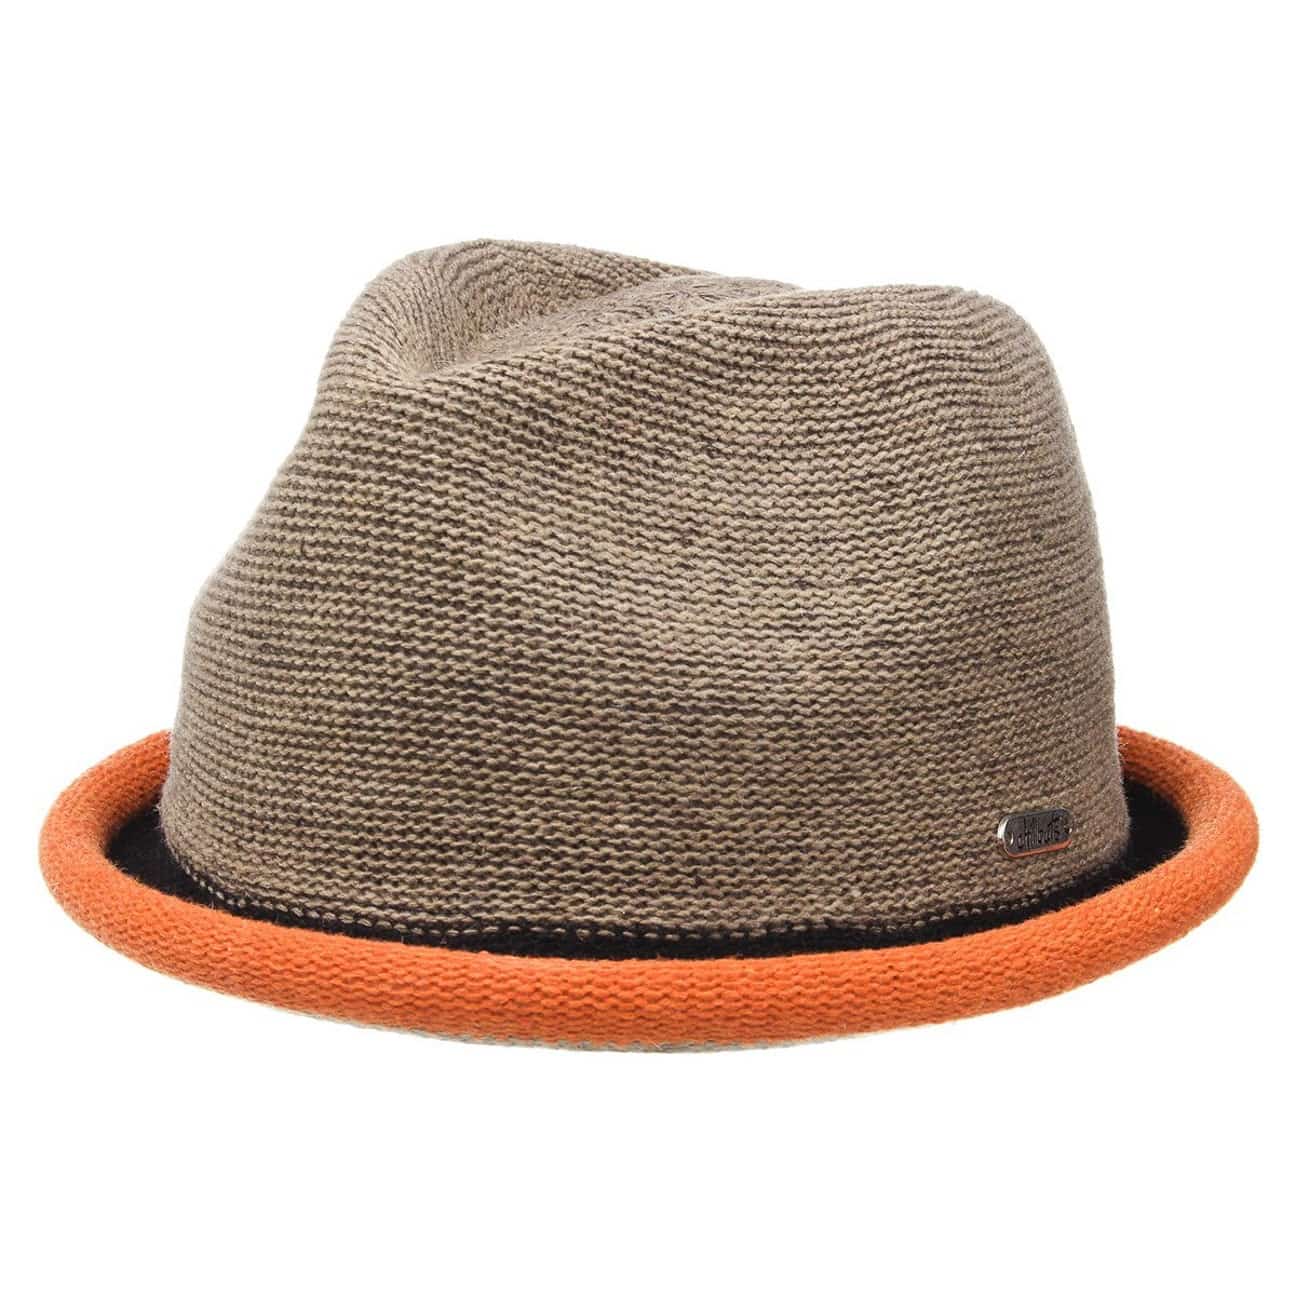 Boston Pork Pie Hat Chillouts cloth hat summer hat 4654 BOS03